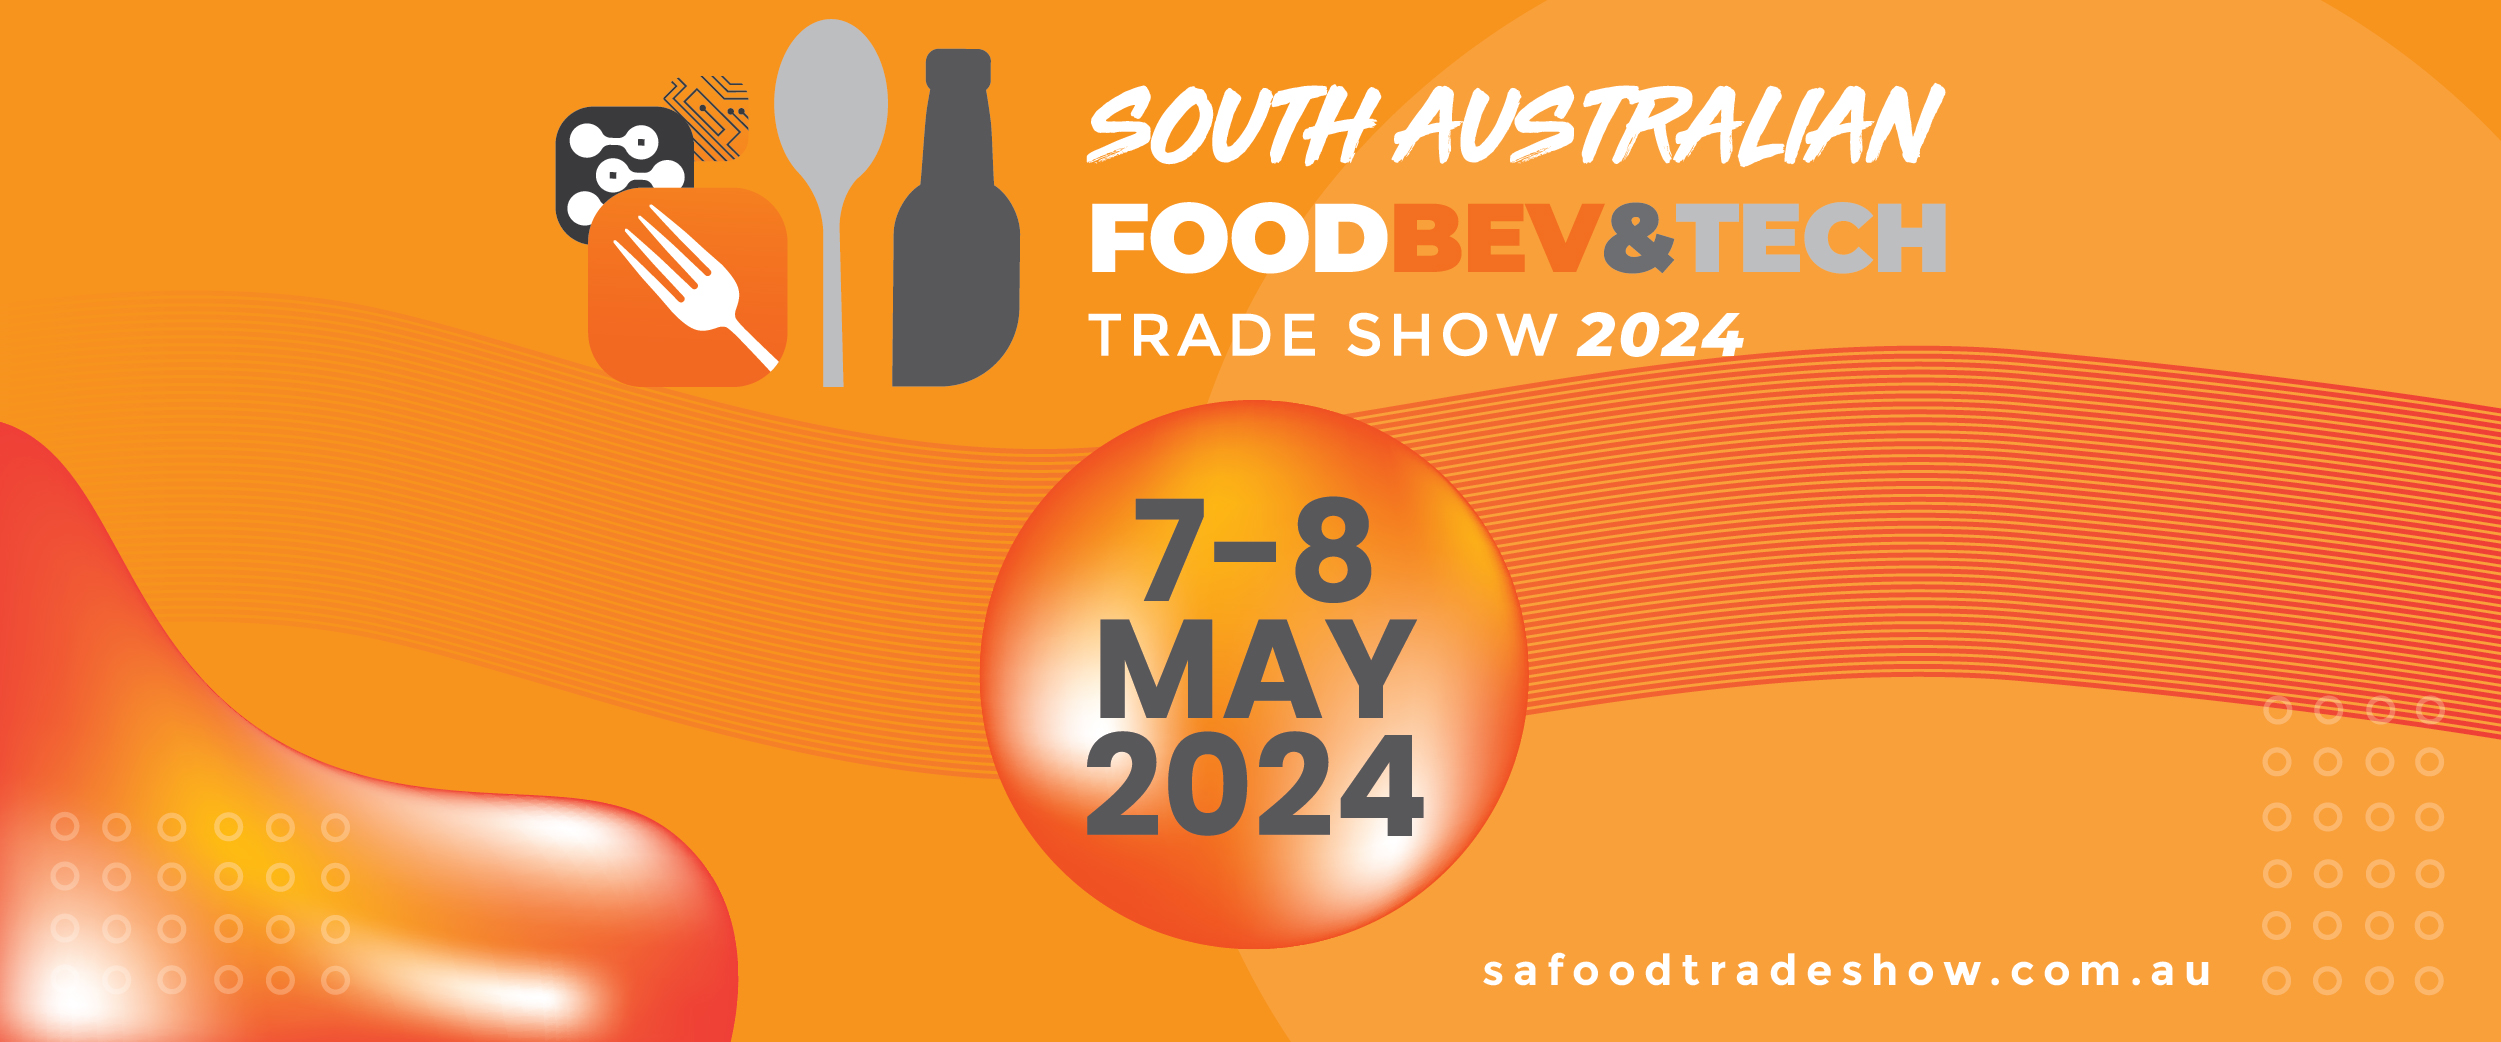 South Australian Food, Bev and Tech Trade Show 2024: Date Announced